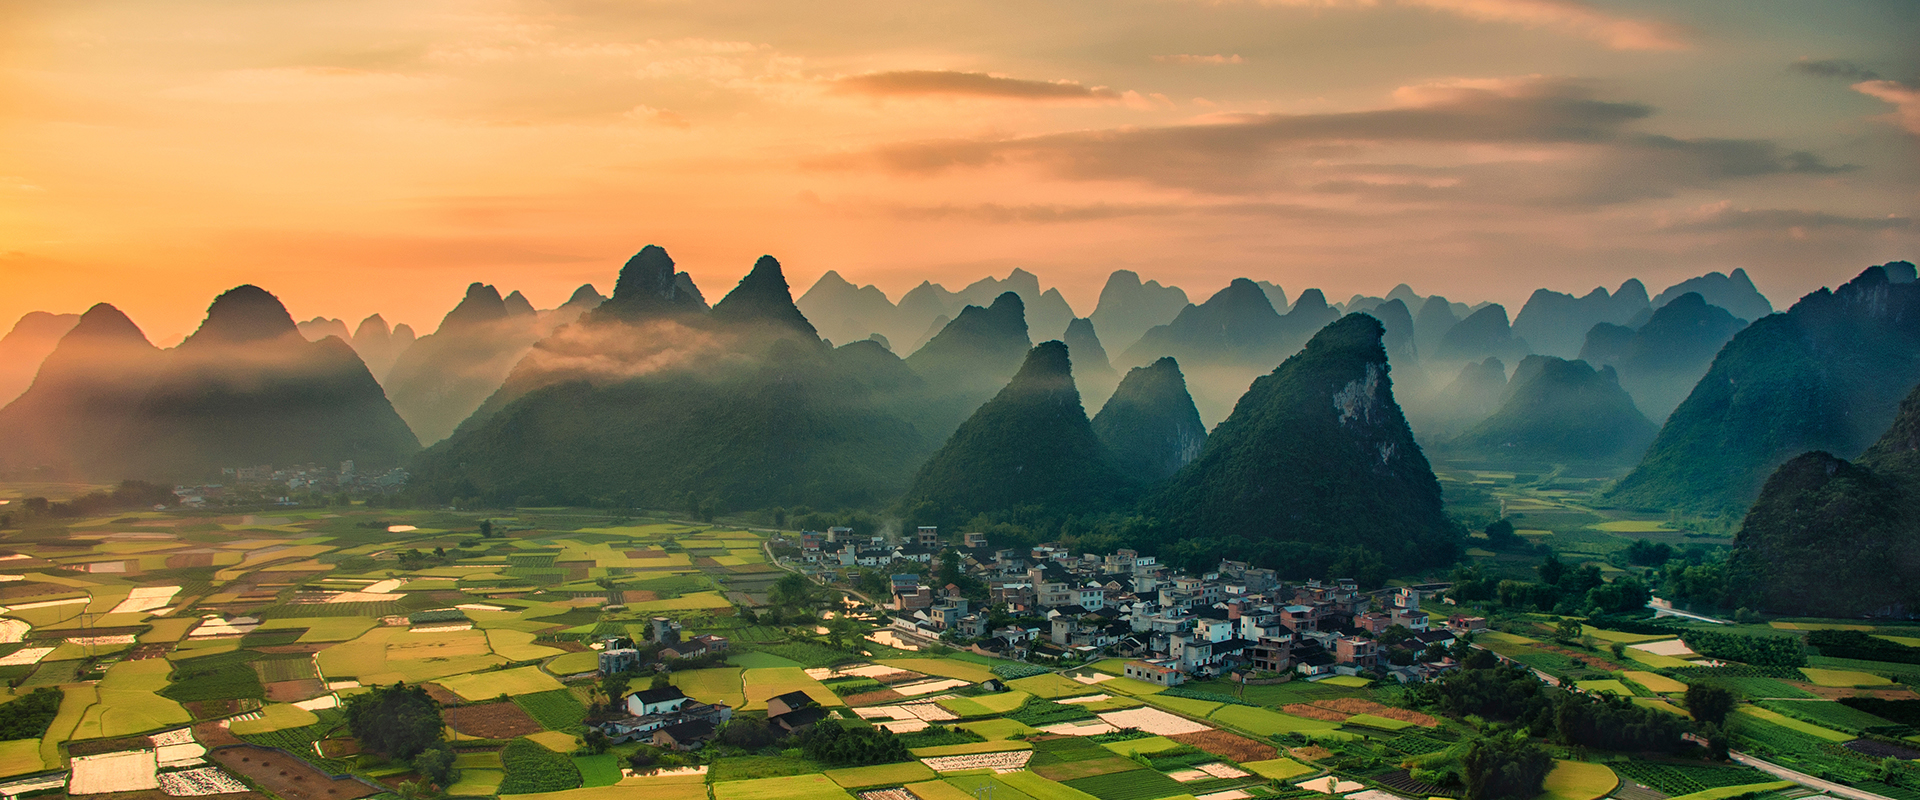 Exploring the charm of Guilin